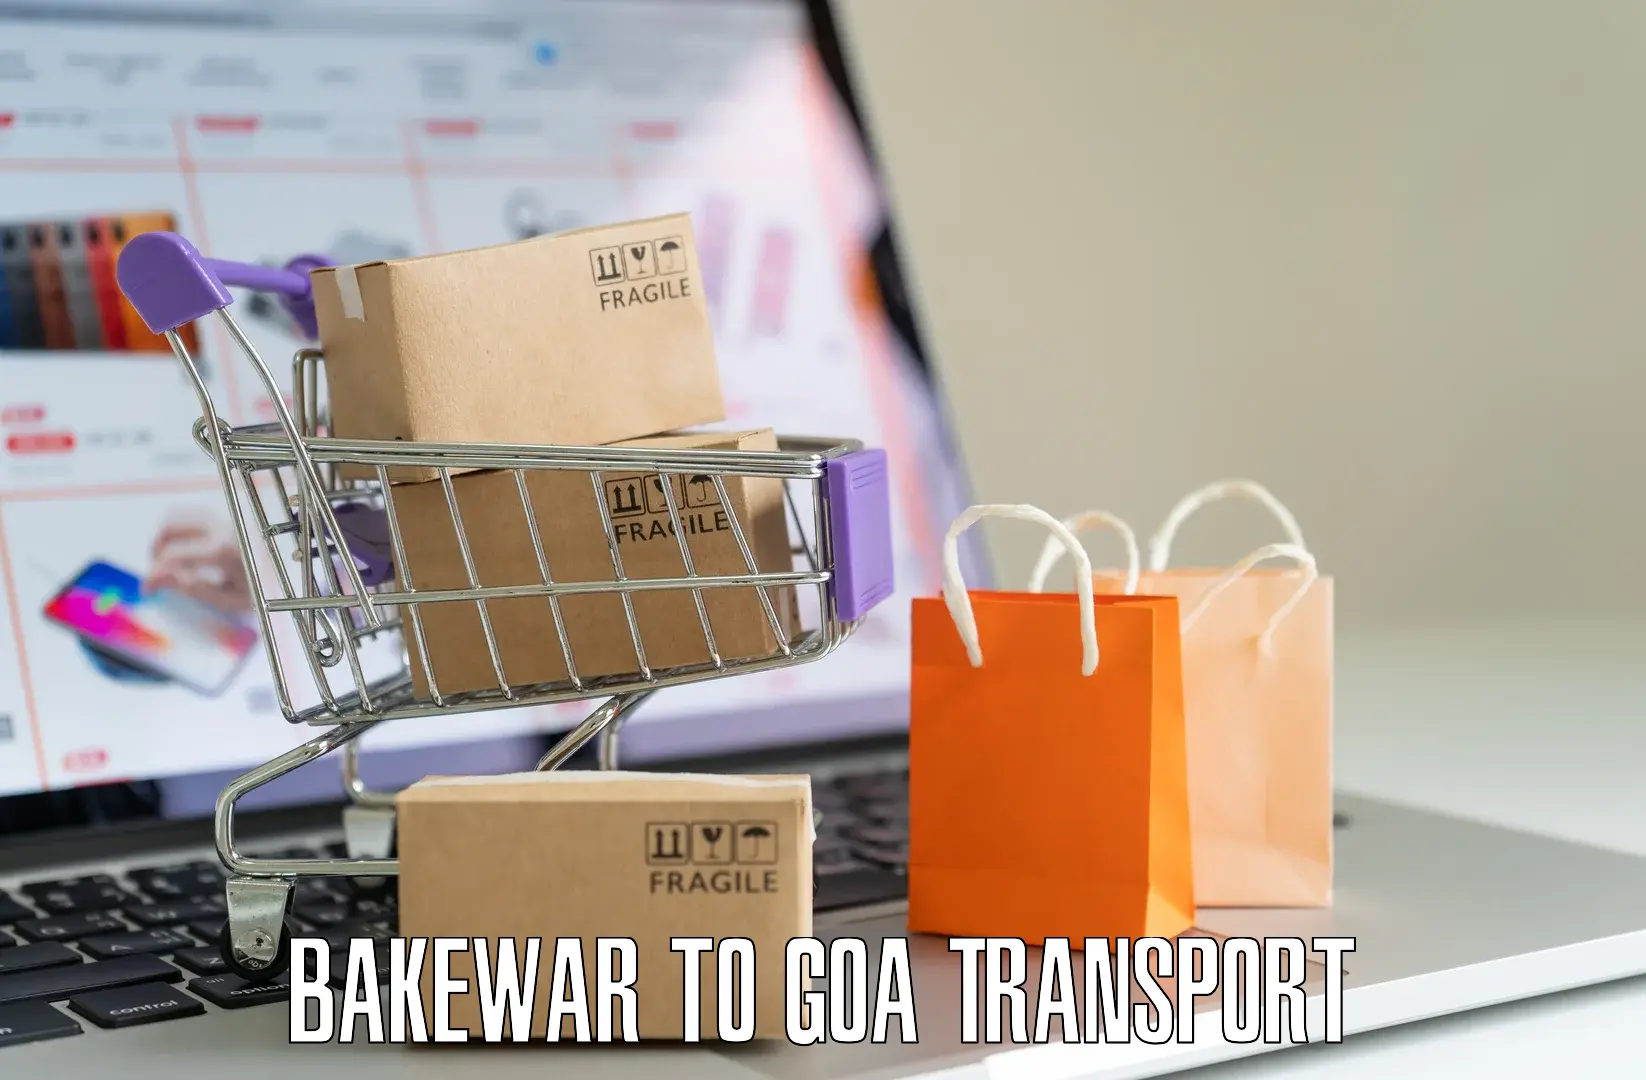 Daily transport service in Bakewar to Bardez